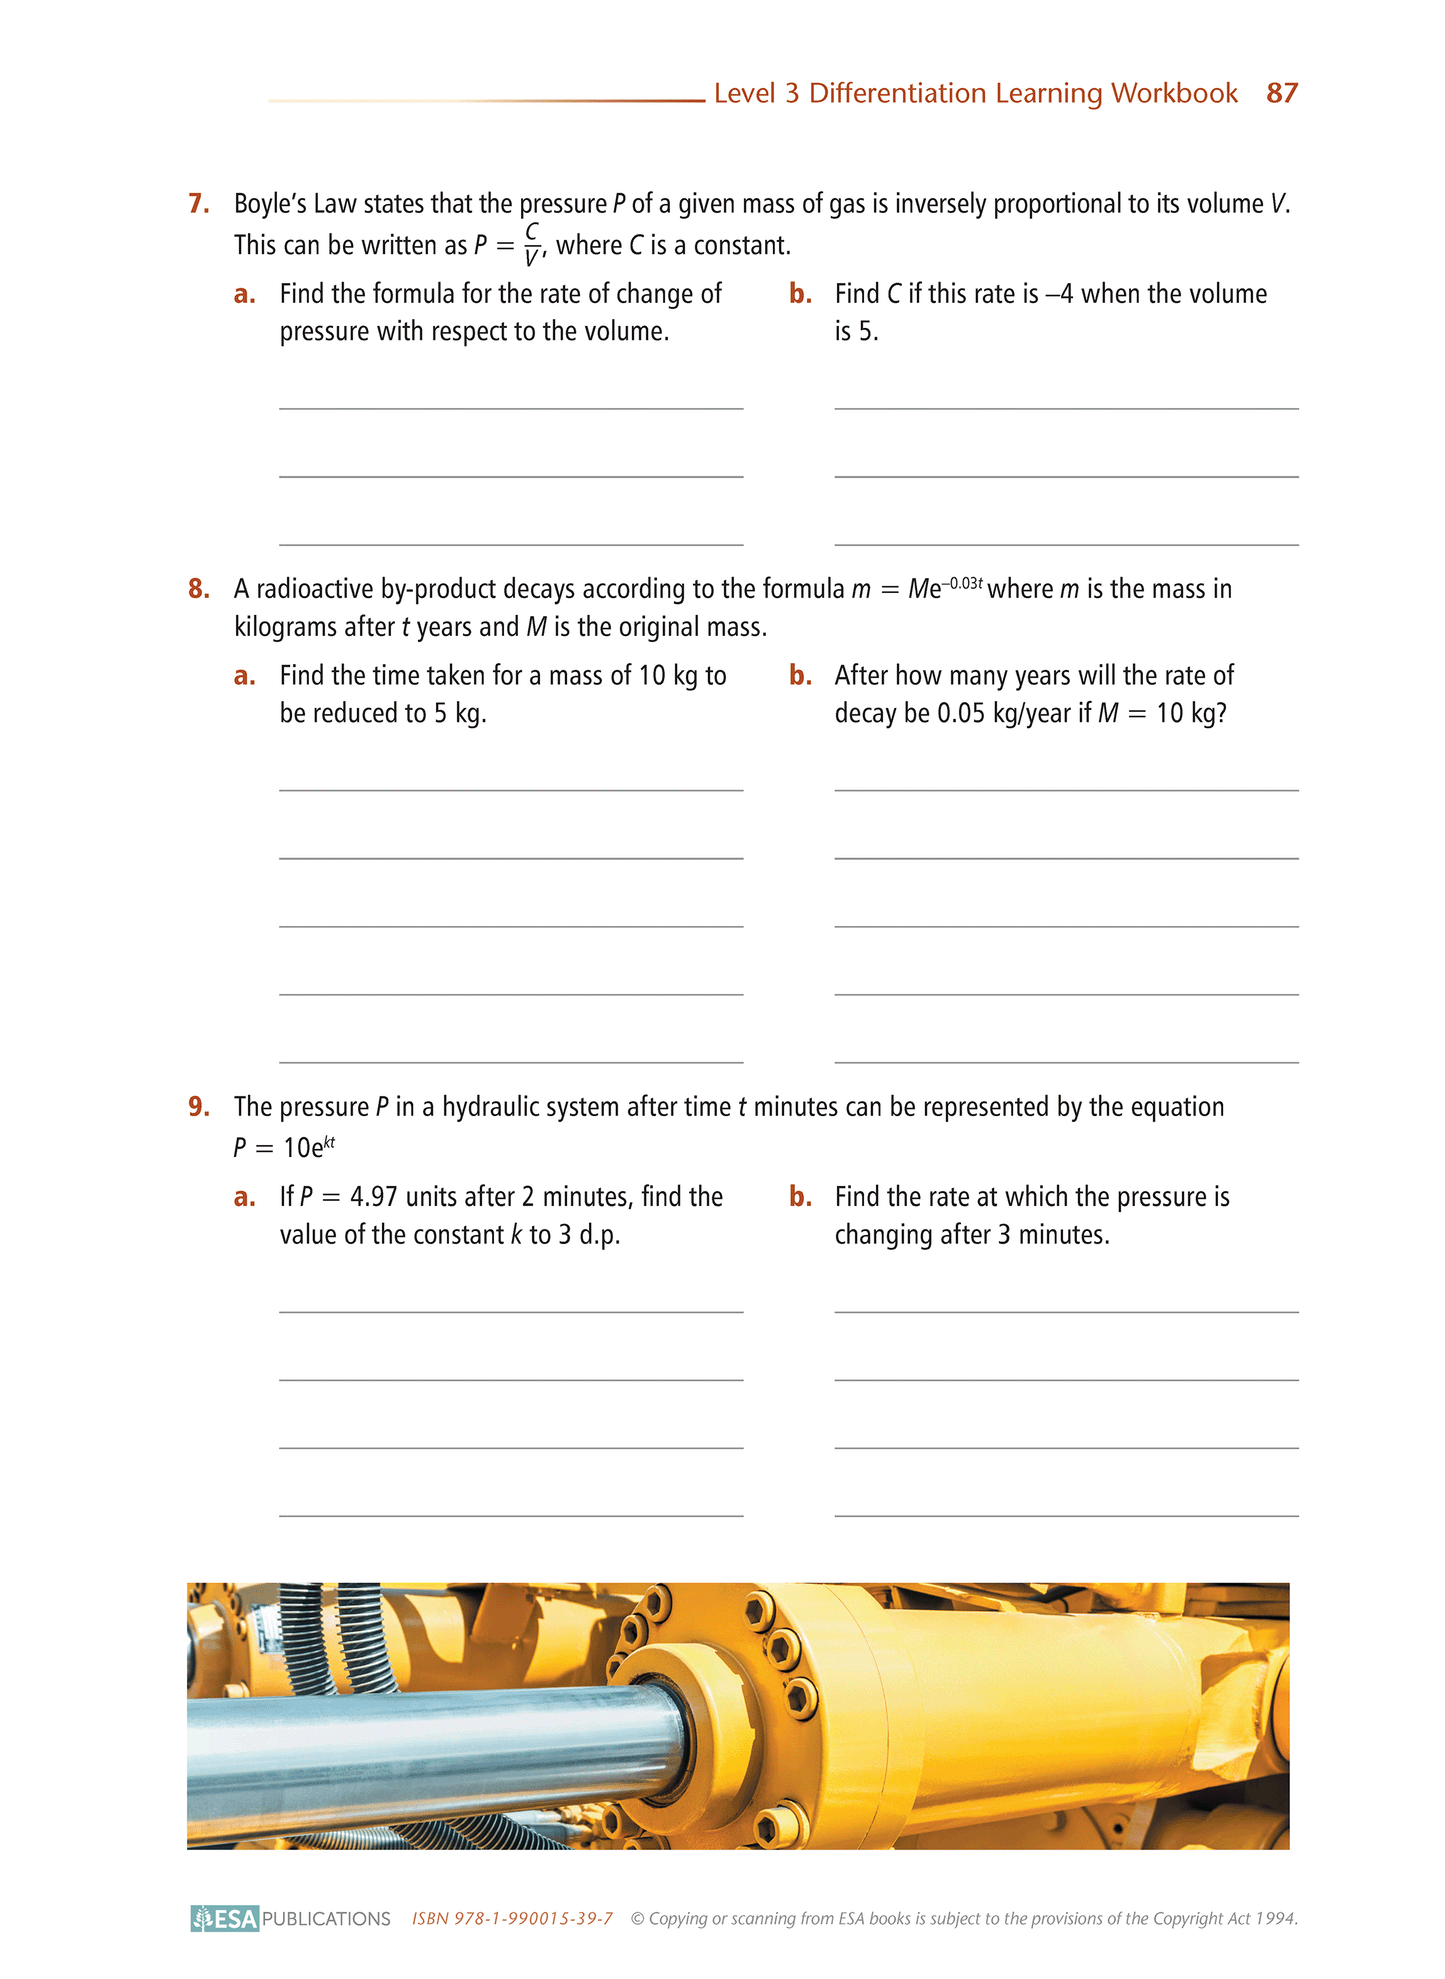 Level 3 Differentiation 3.6 Learning Workbook